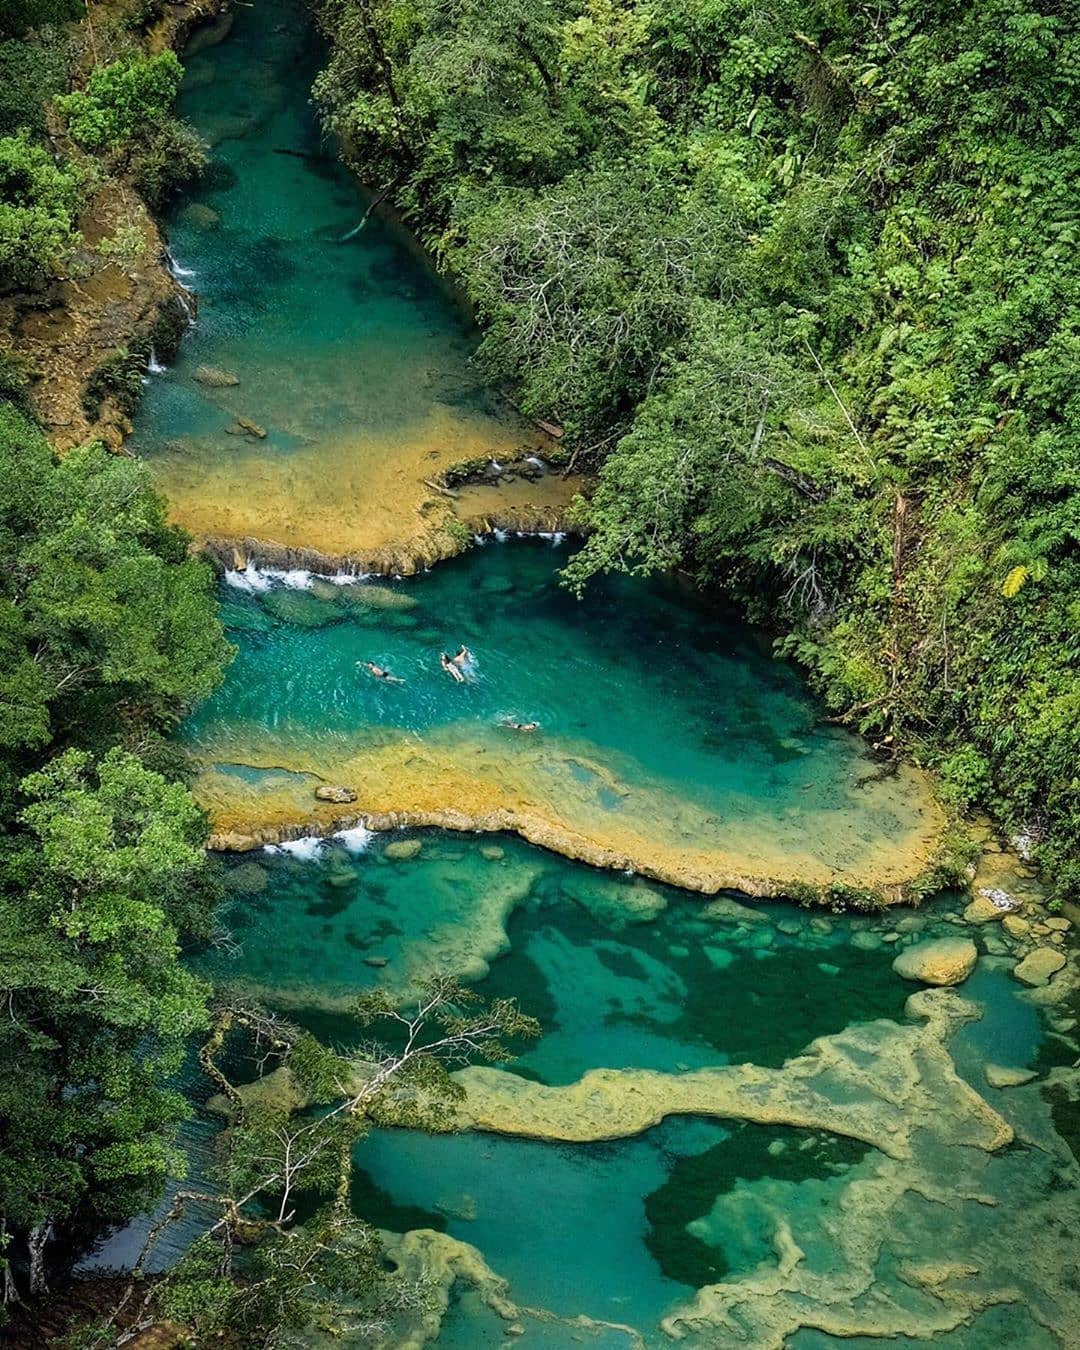  Things to do in Semuc Champey